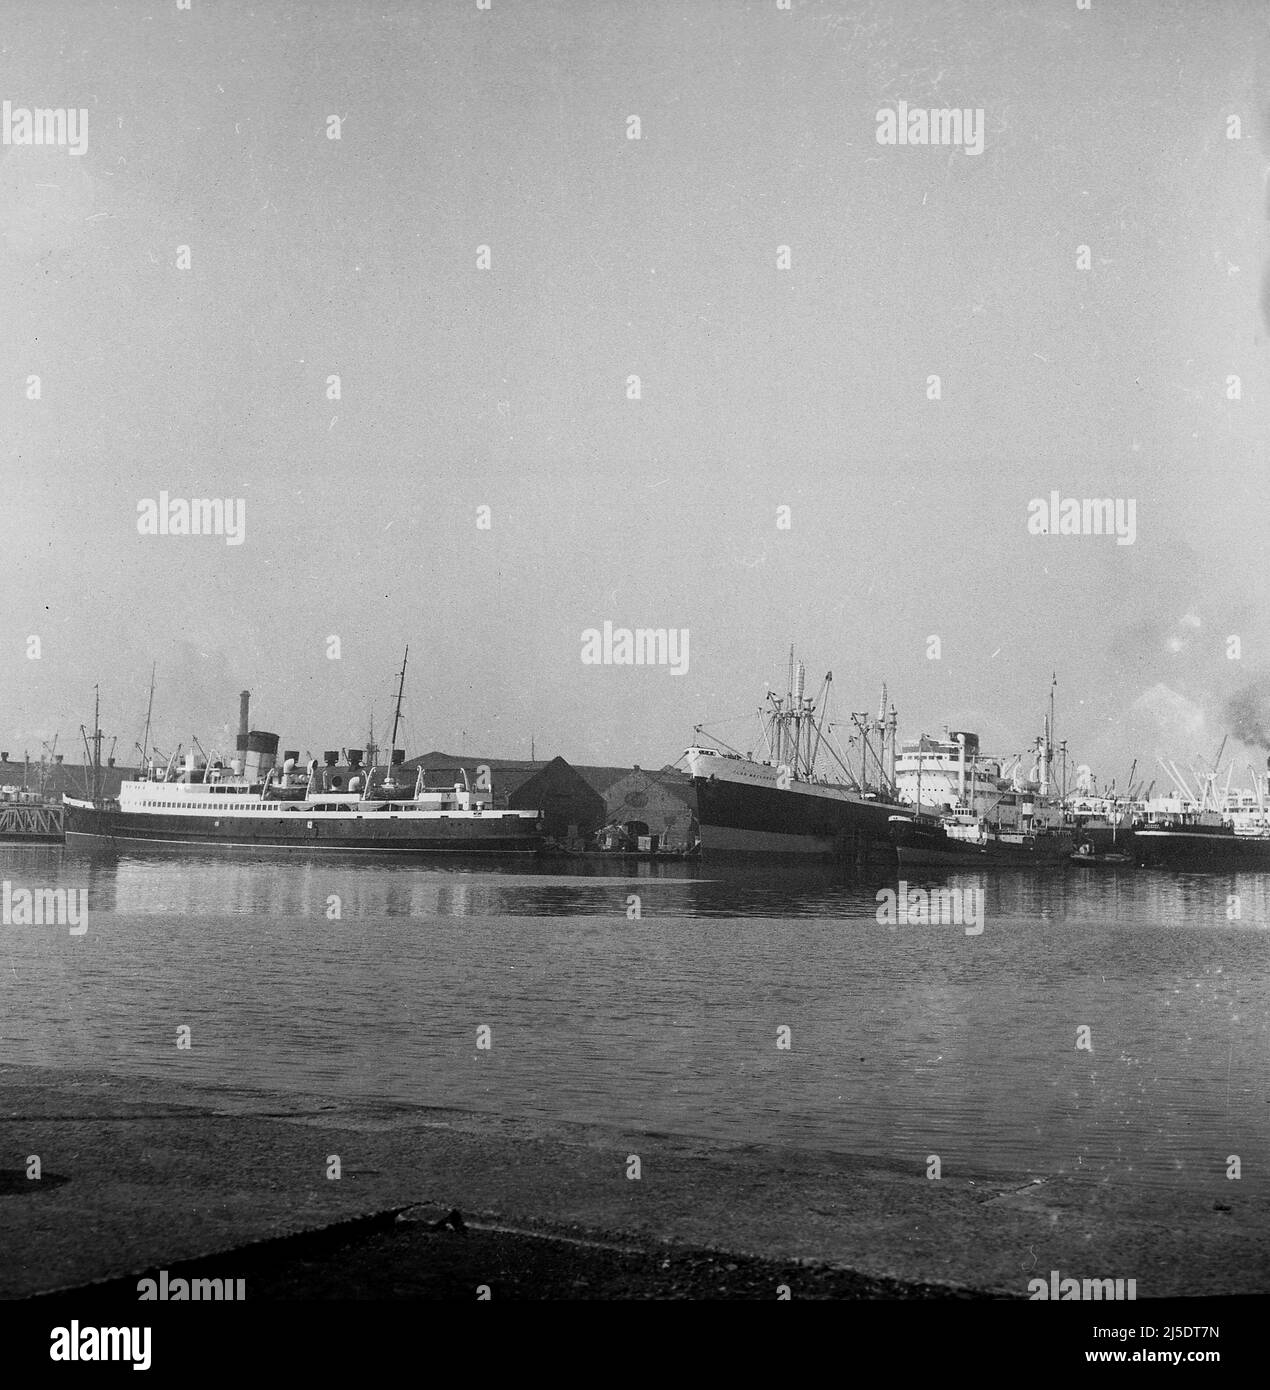 1961, historical, container ships docked at Birkenhead, Liverpool, including the cargo ship, SS Clan Maclaren, one of the many ships of the Clan Line, which in this era were part of British and Commonwealth Shipping Ltd, who also owned the Union-Castle Line. As cargo shipping changed into what is now container shipping, the Clan Line ceased trading in 1981. The docks at Birkenhead closed in 1993. Stock Photo